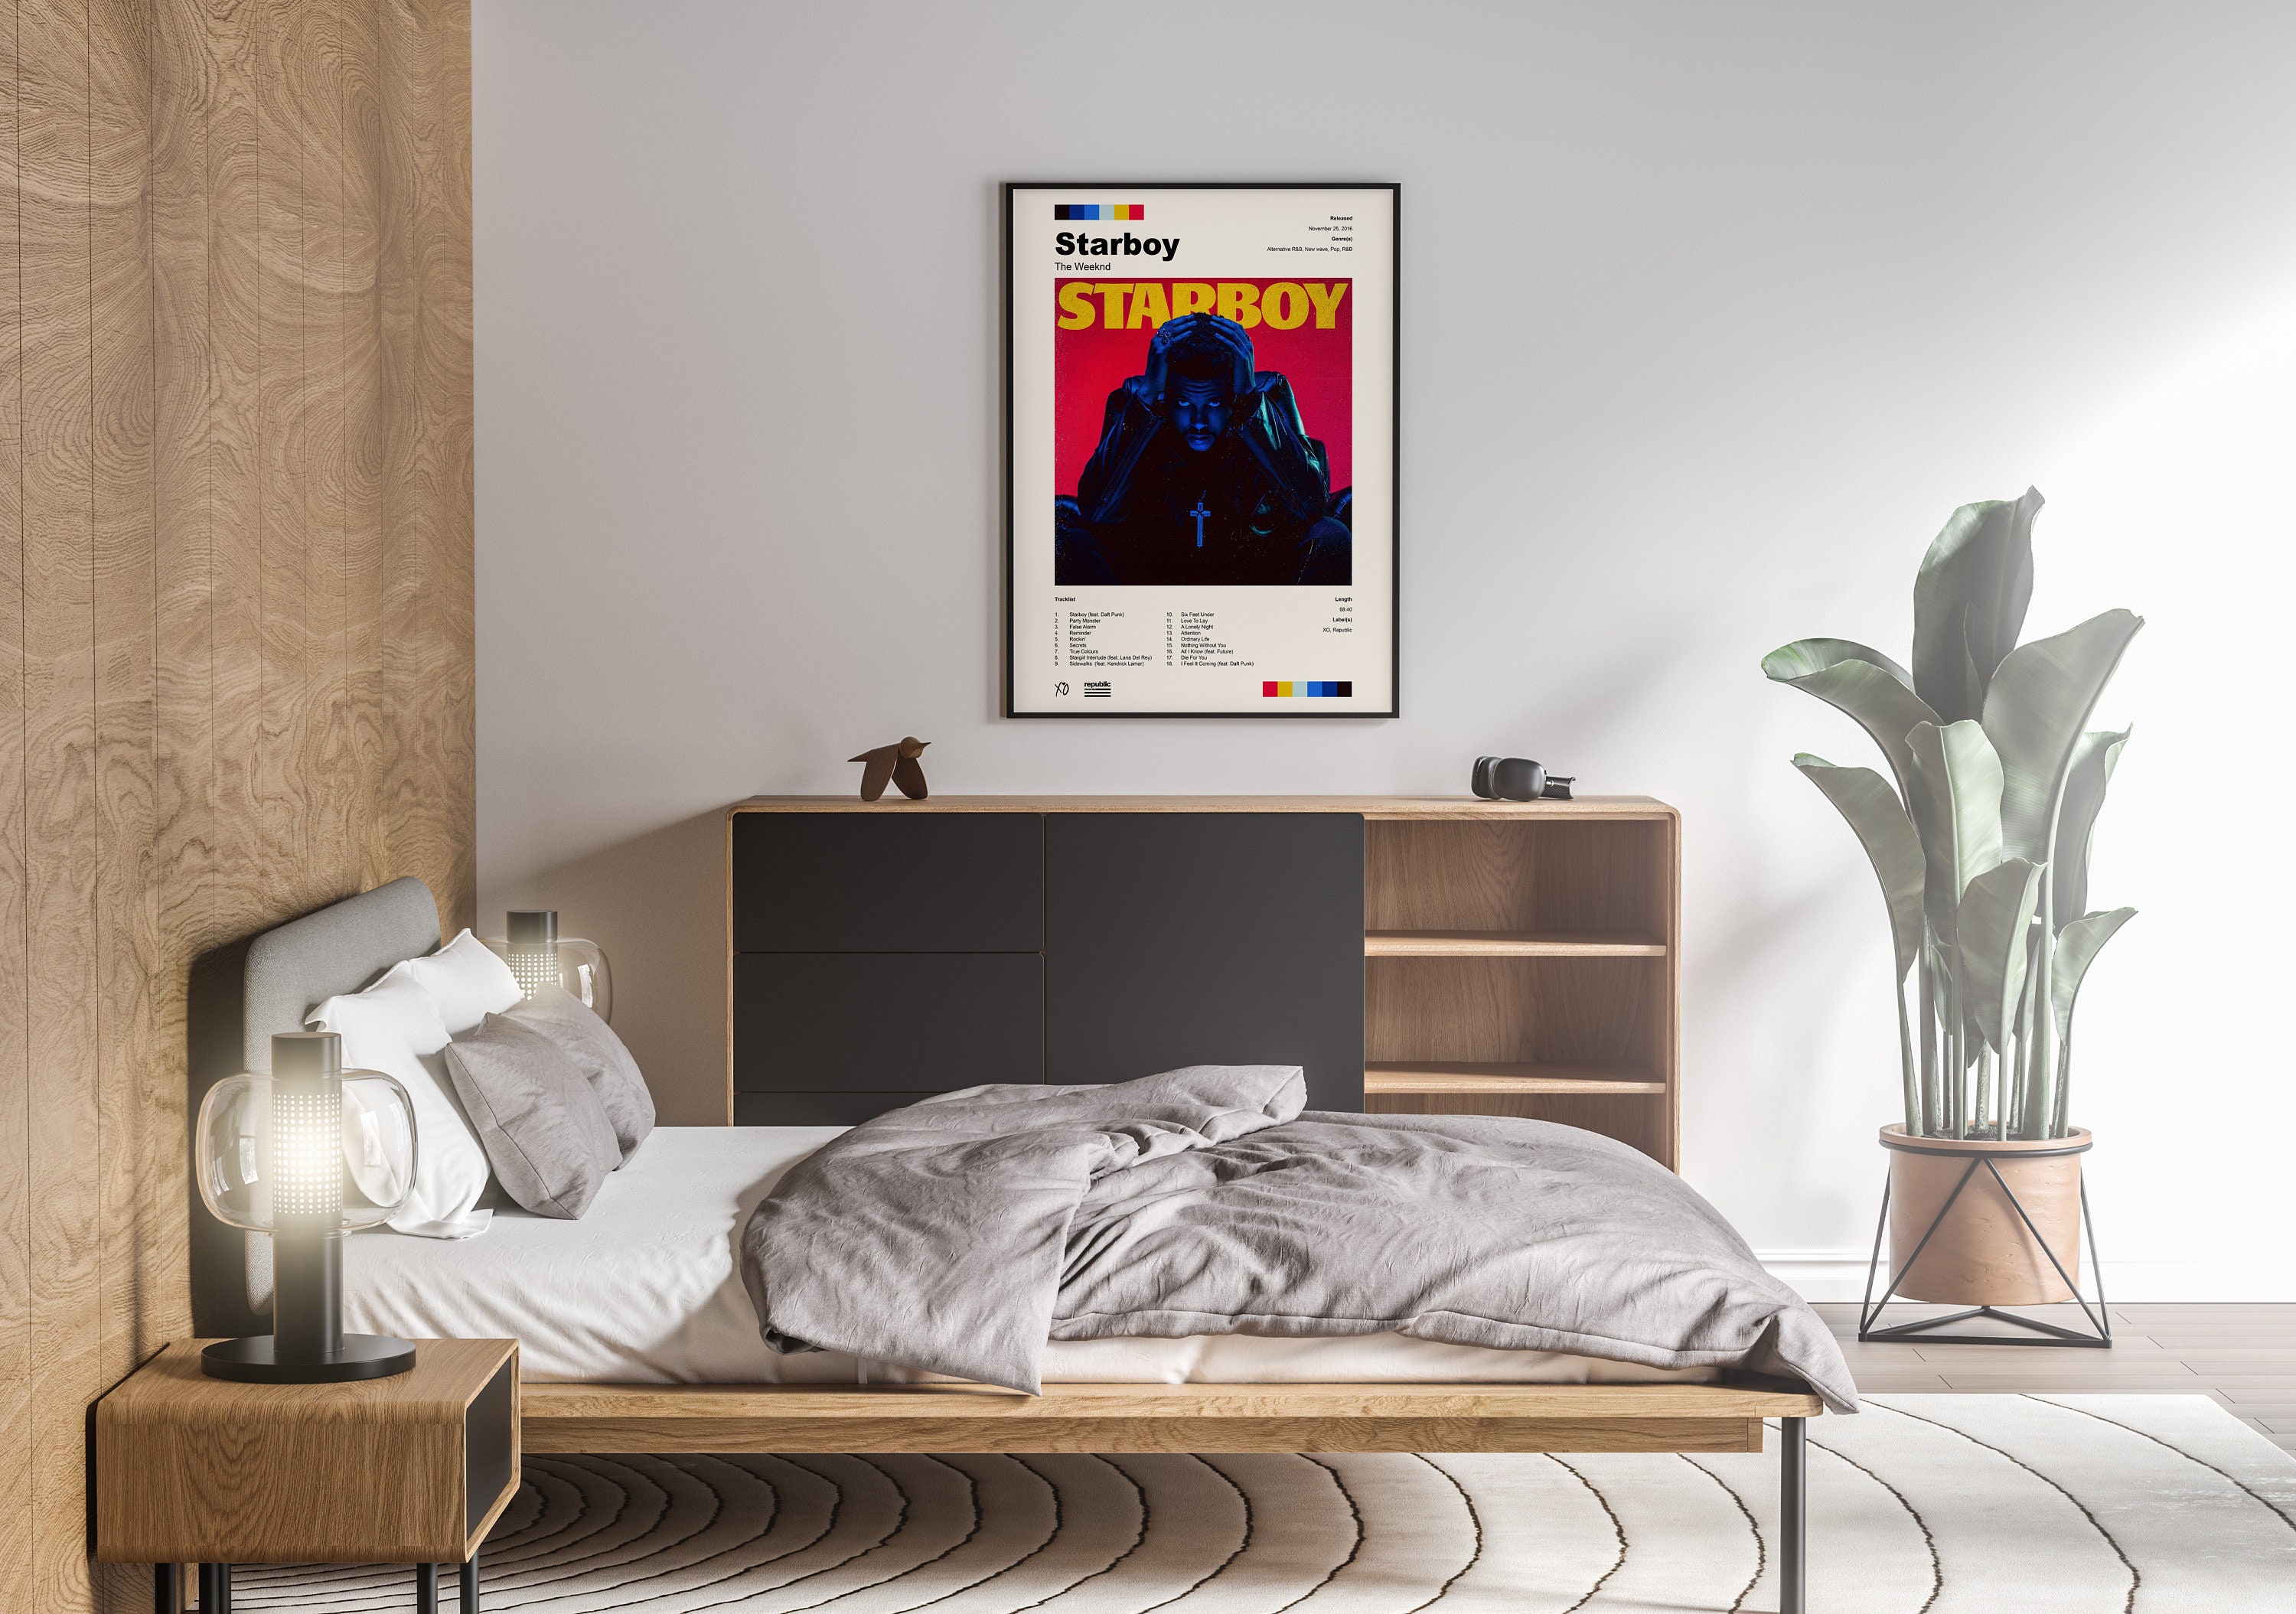 Discover The Weeknd - Starboy Album Premium Matte Vertical Poster